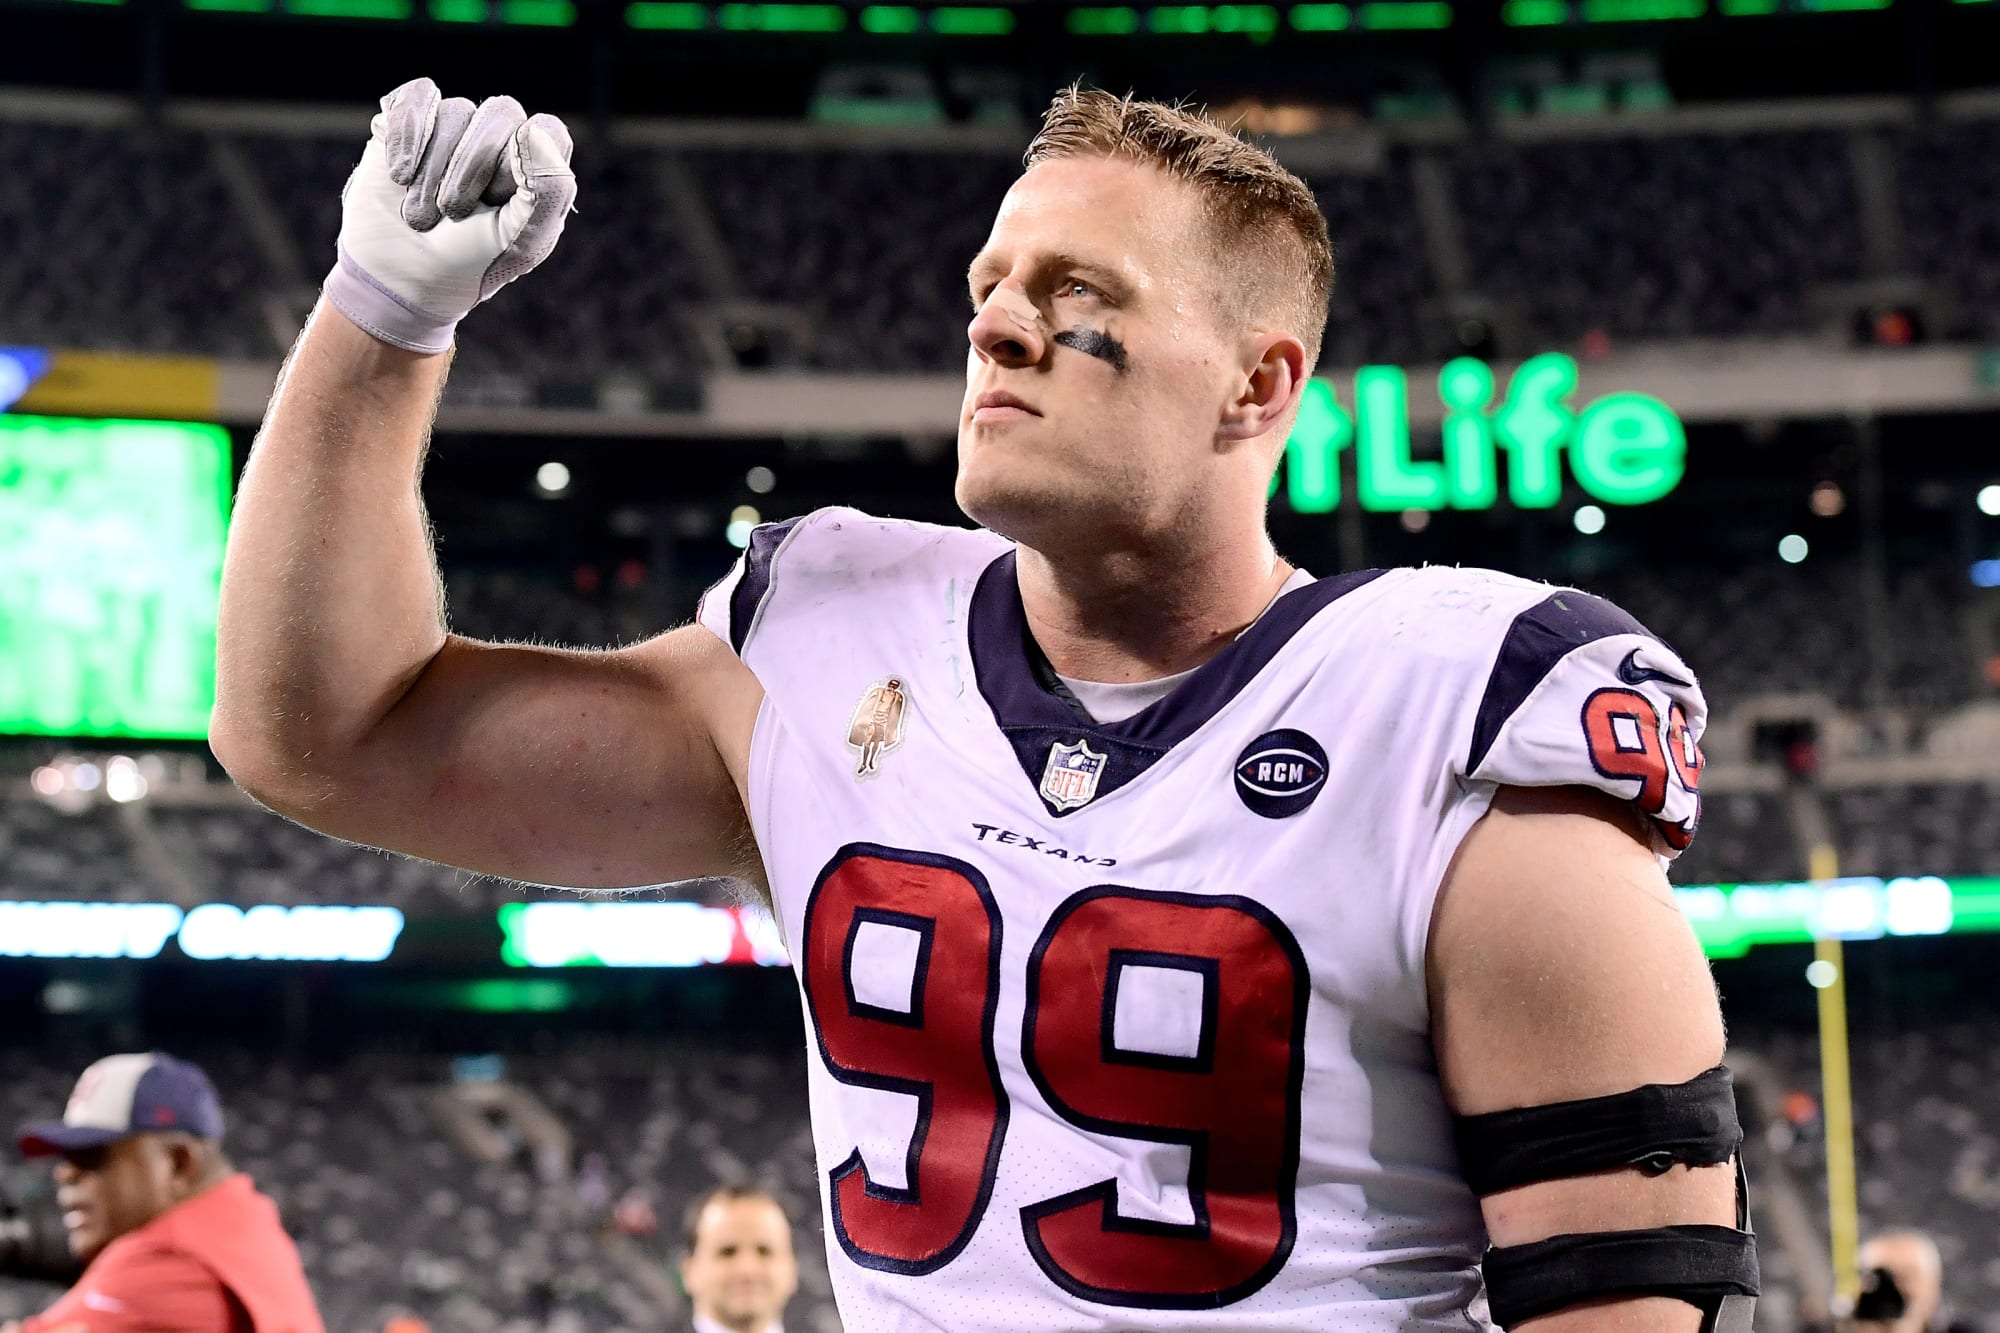 Houston Texans Firstround bye secured, plenty of work left to do